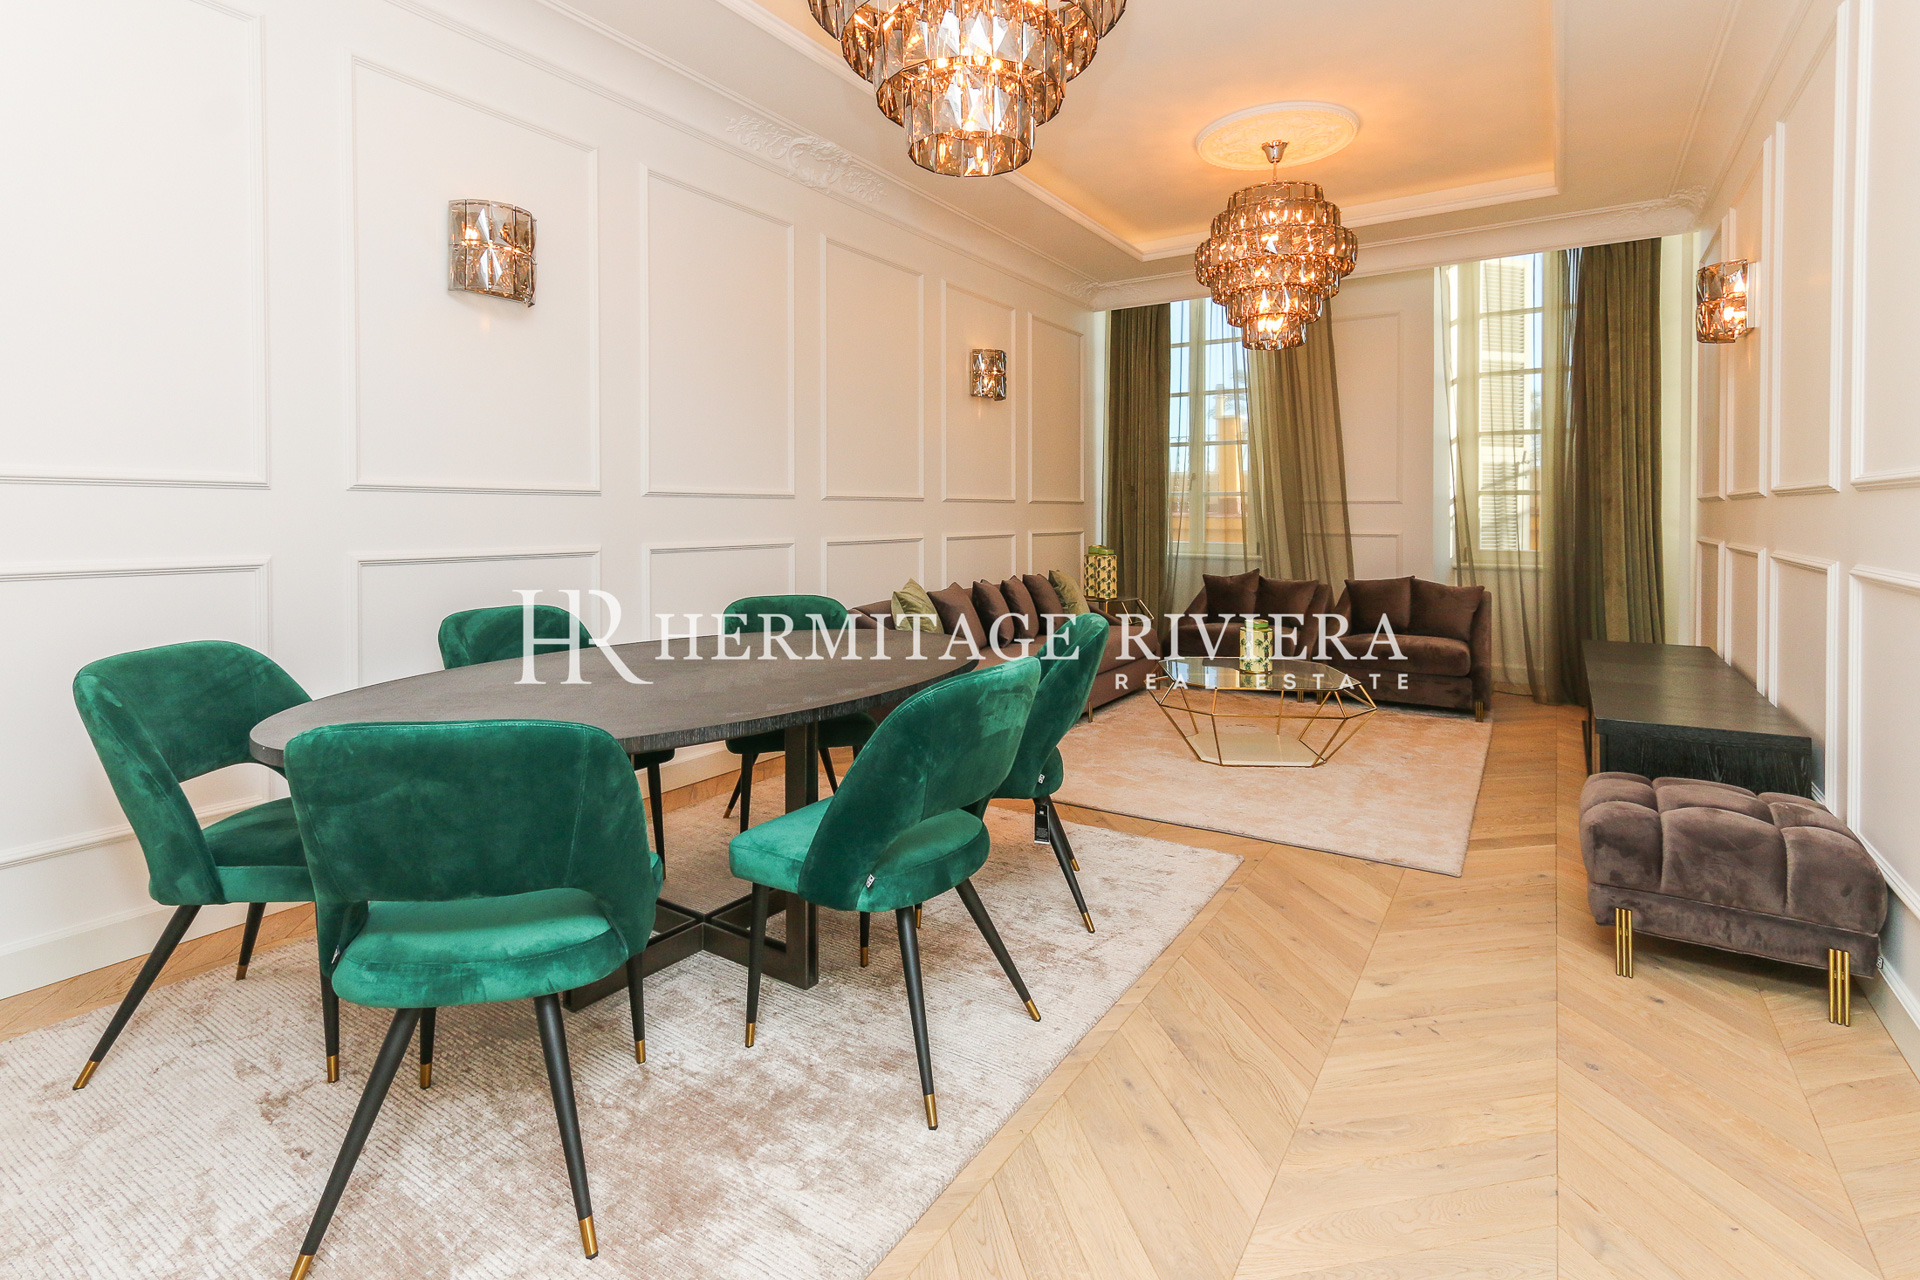 Sumptuous apartment in an exceptional location (image 3)